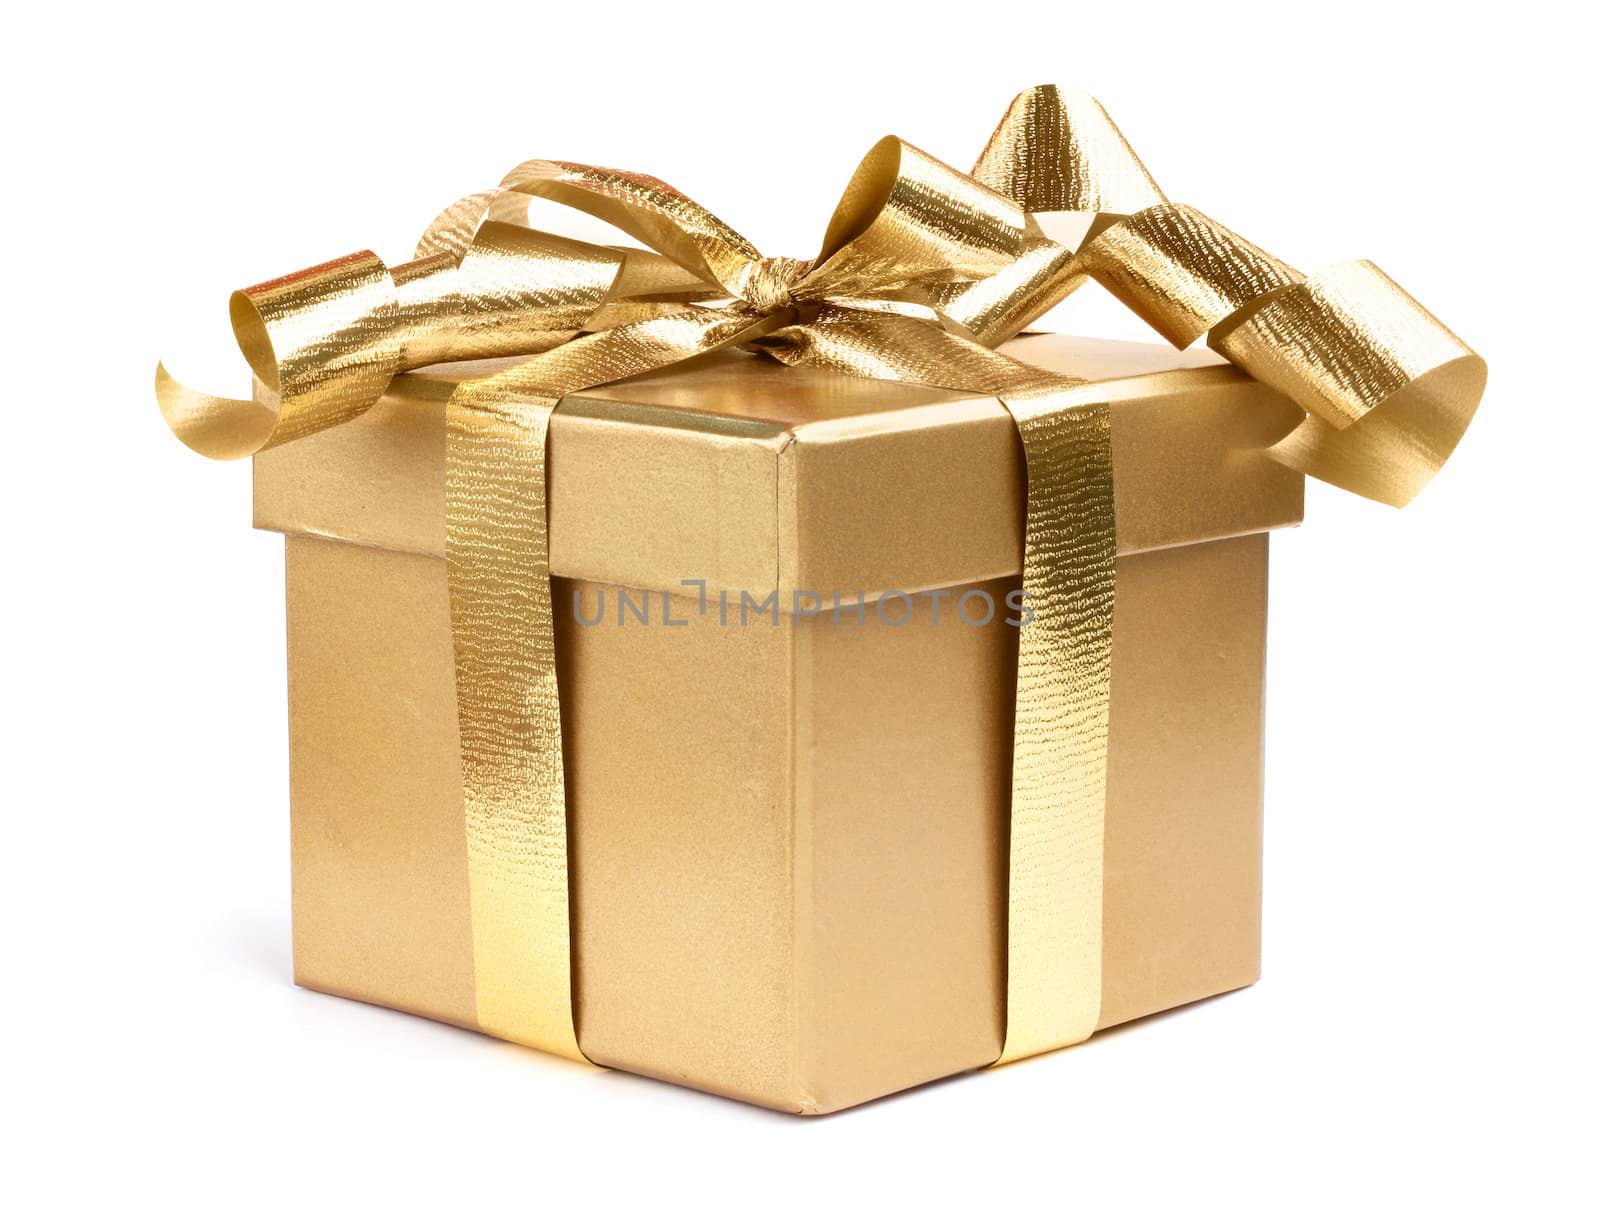 Golden gift box decotated with ribbon isolated on white background